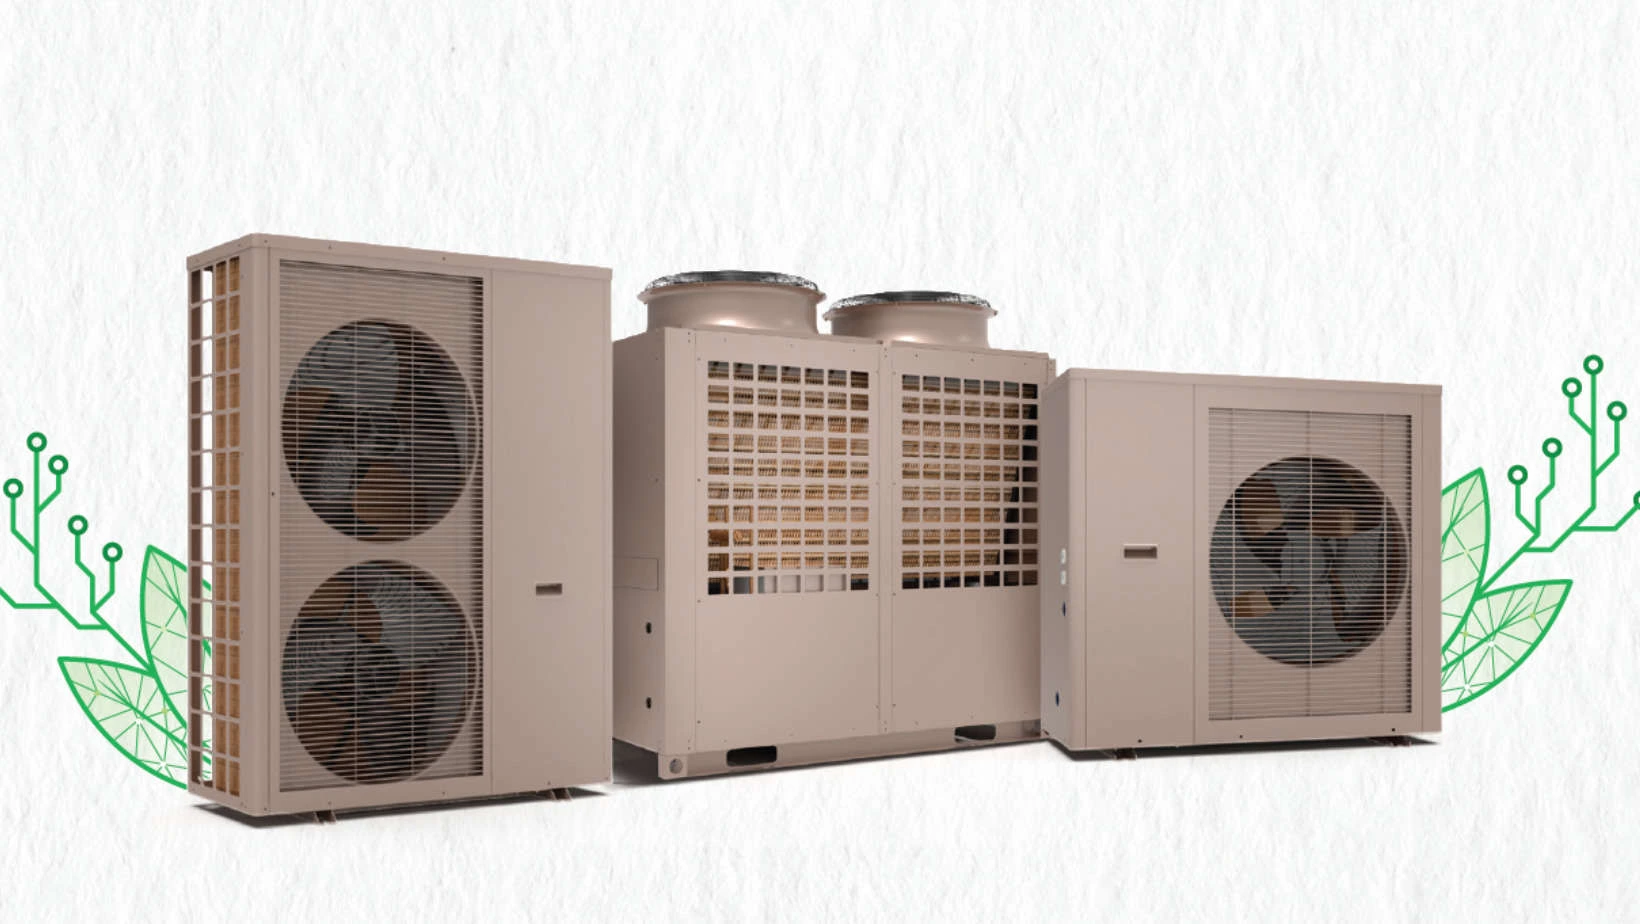 Revolutionizing hot water: The unmatched advantages of Racold heat pump water heaters